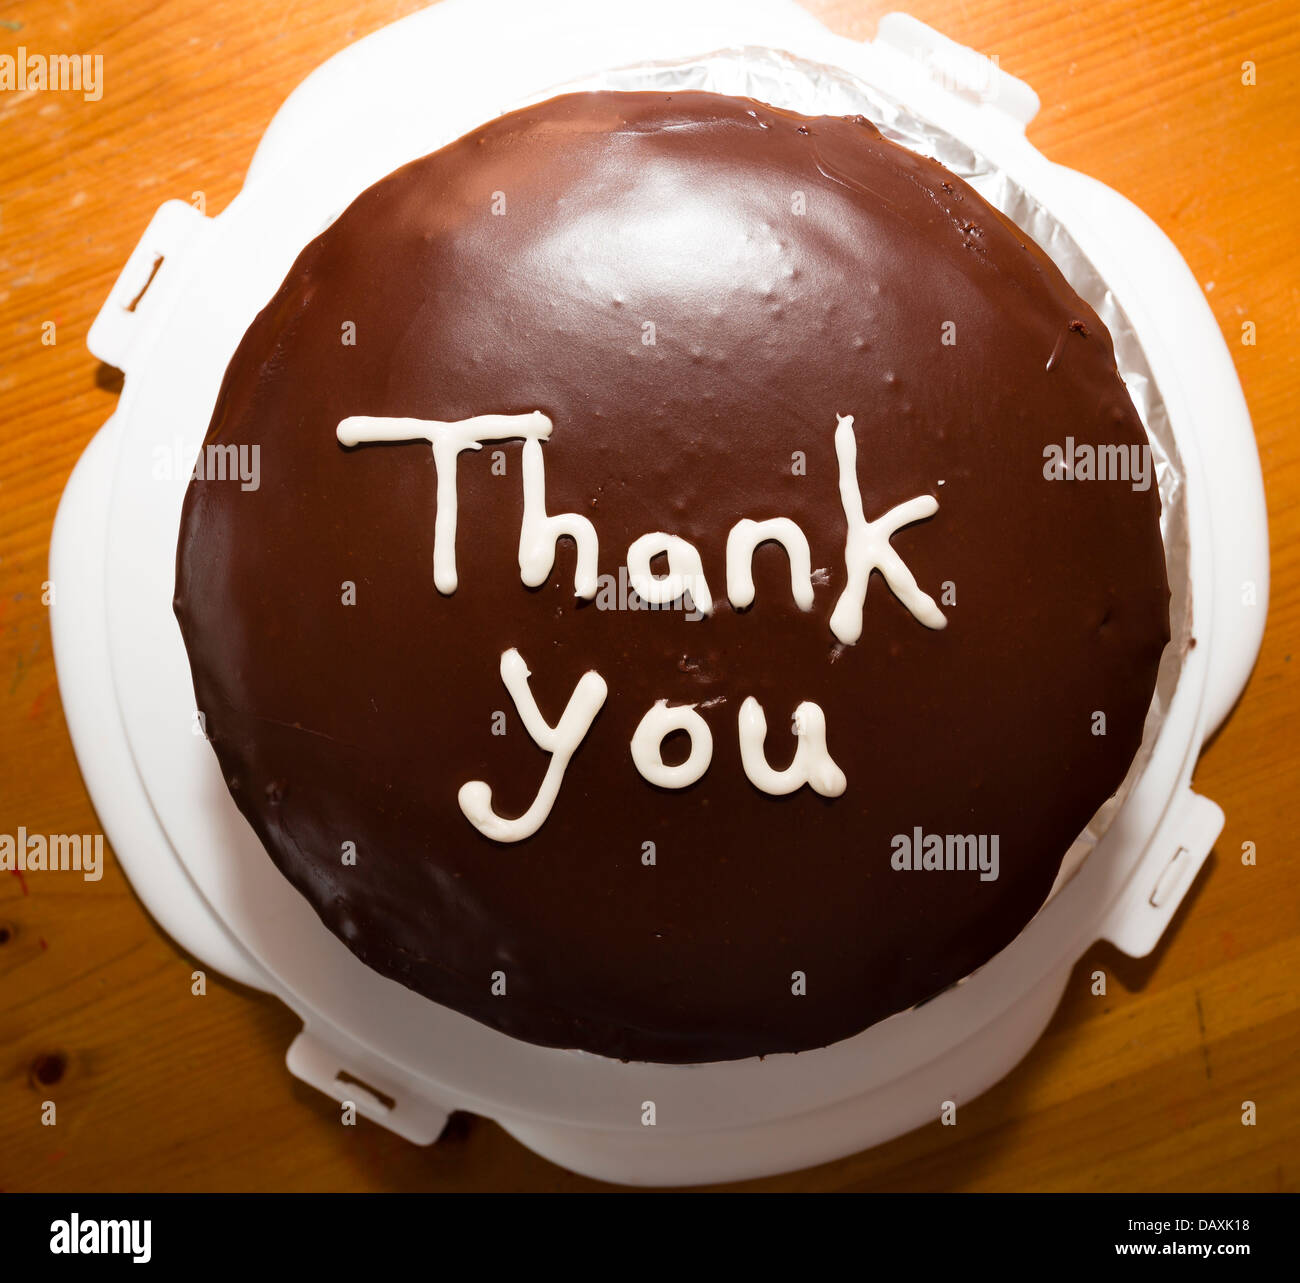 Share 74+ thank you cake latest - in.daotaonec